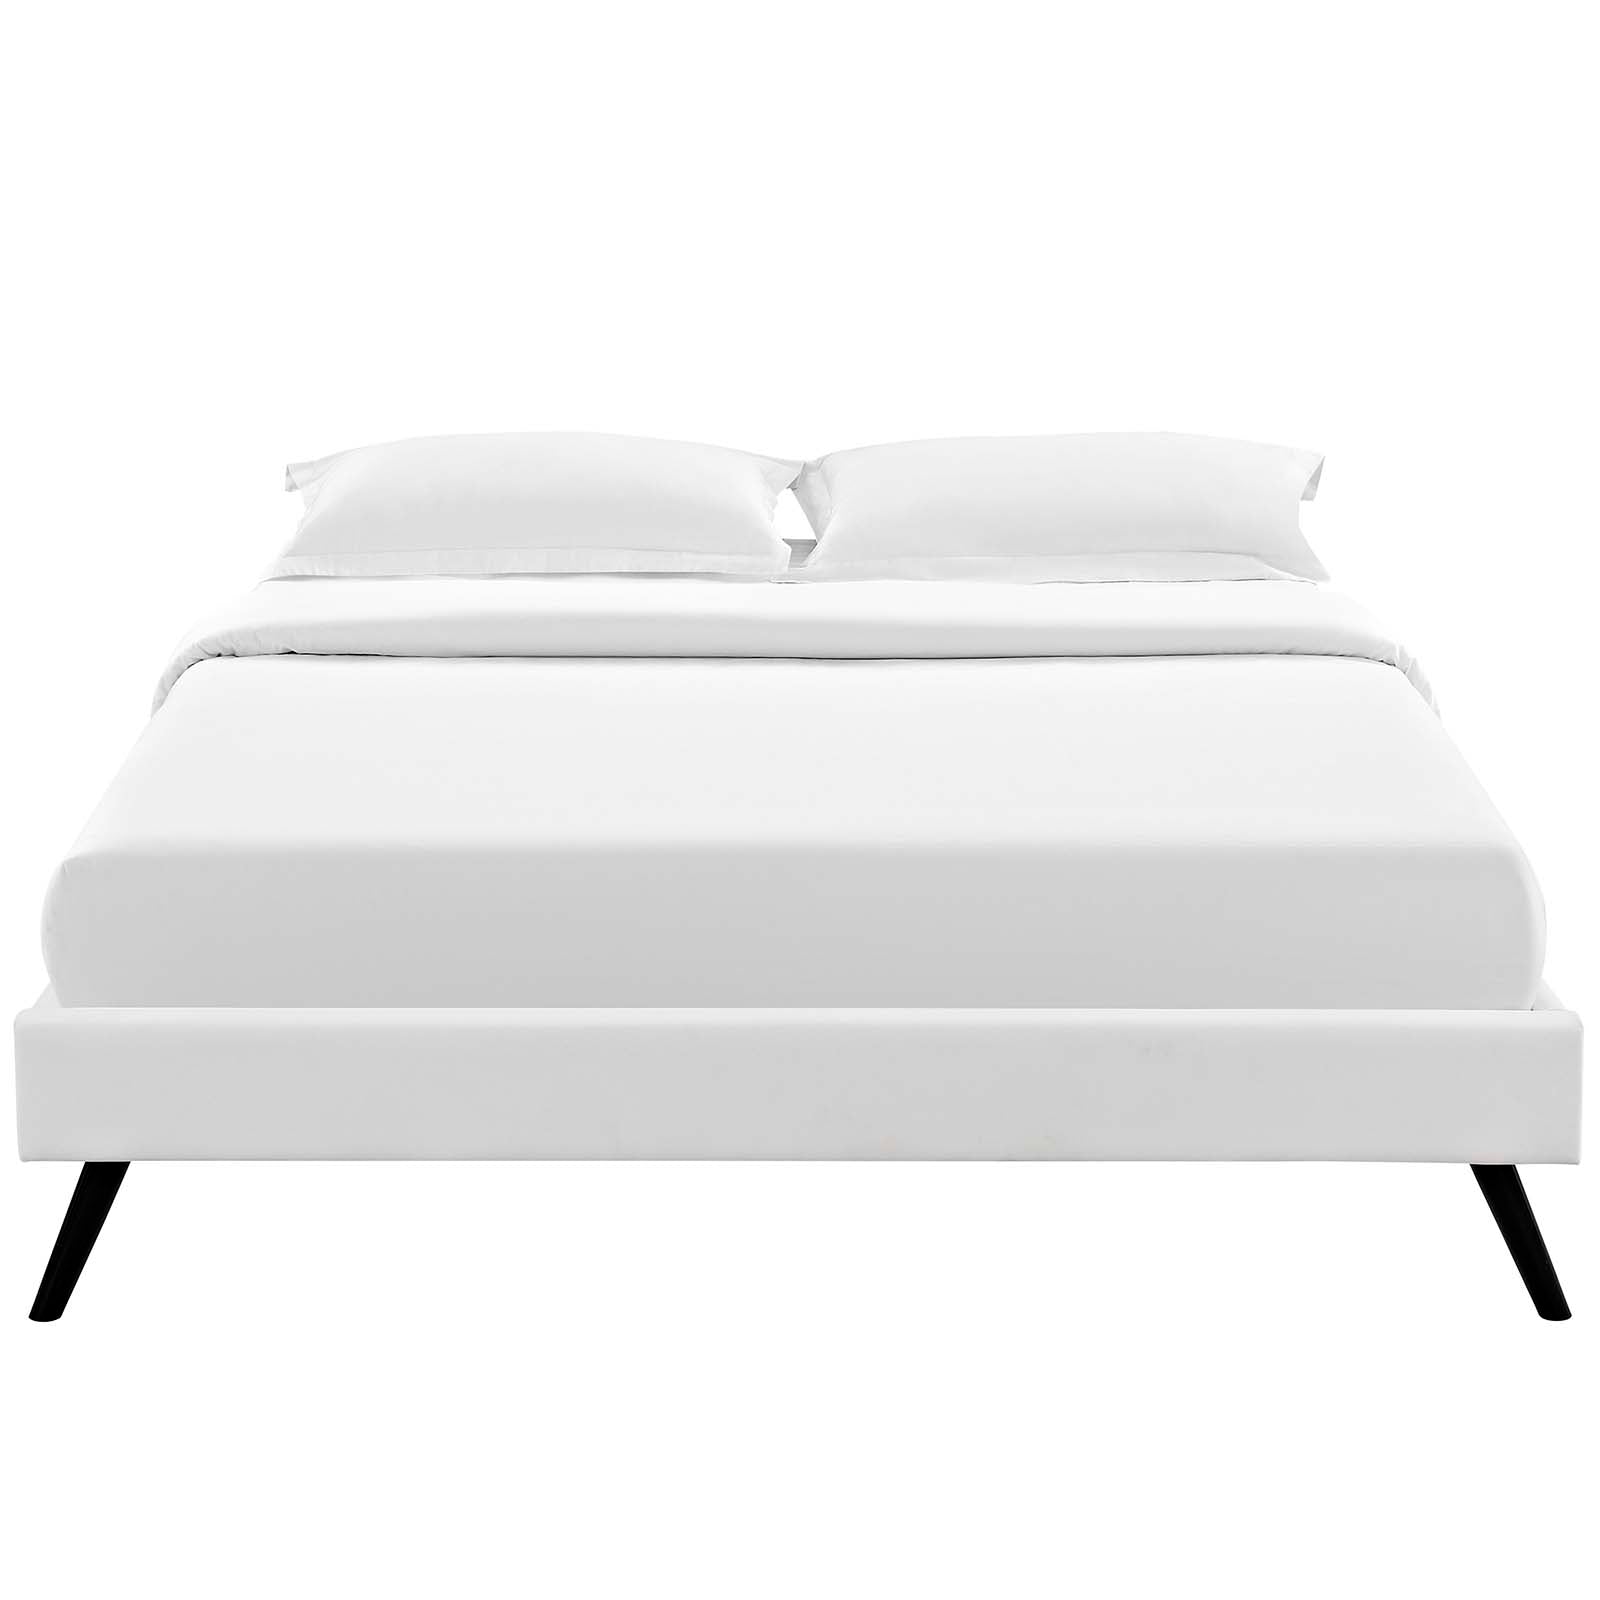 Modway Beds - Loryn Queen Vinyl Bed Frame with Round Splayed Legs White